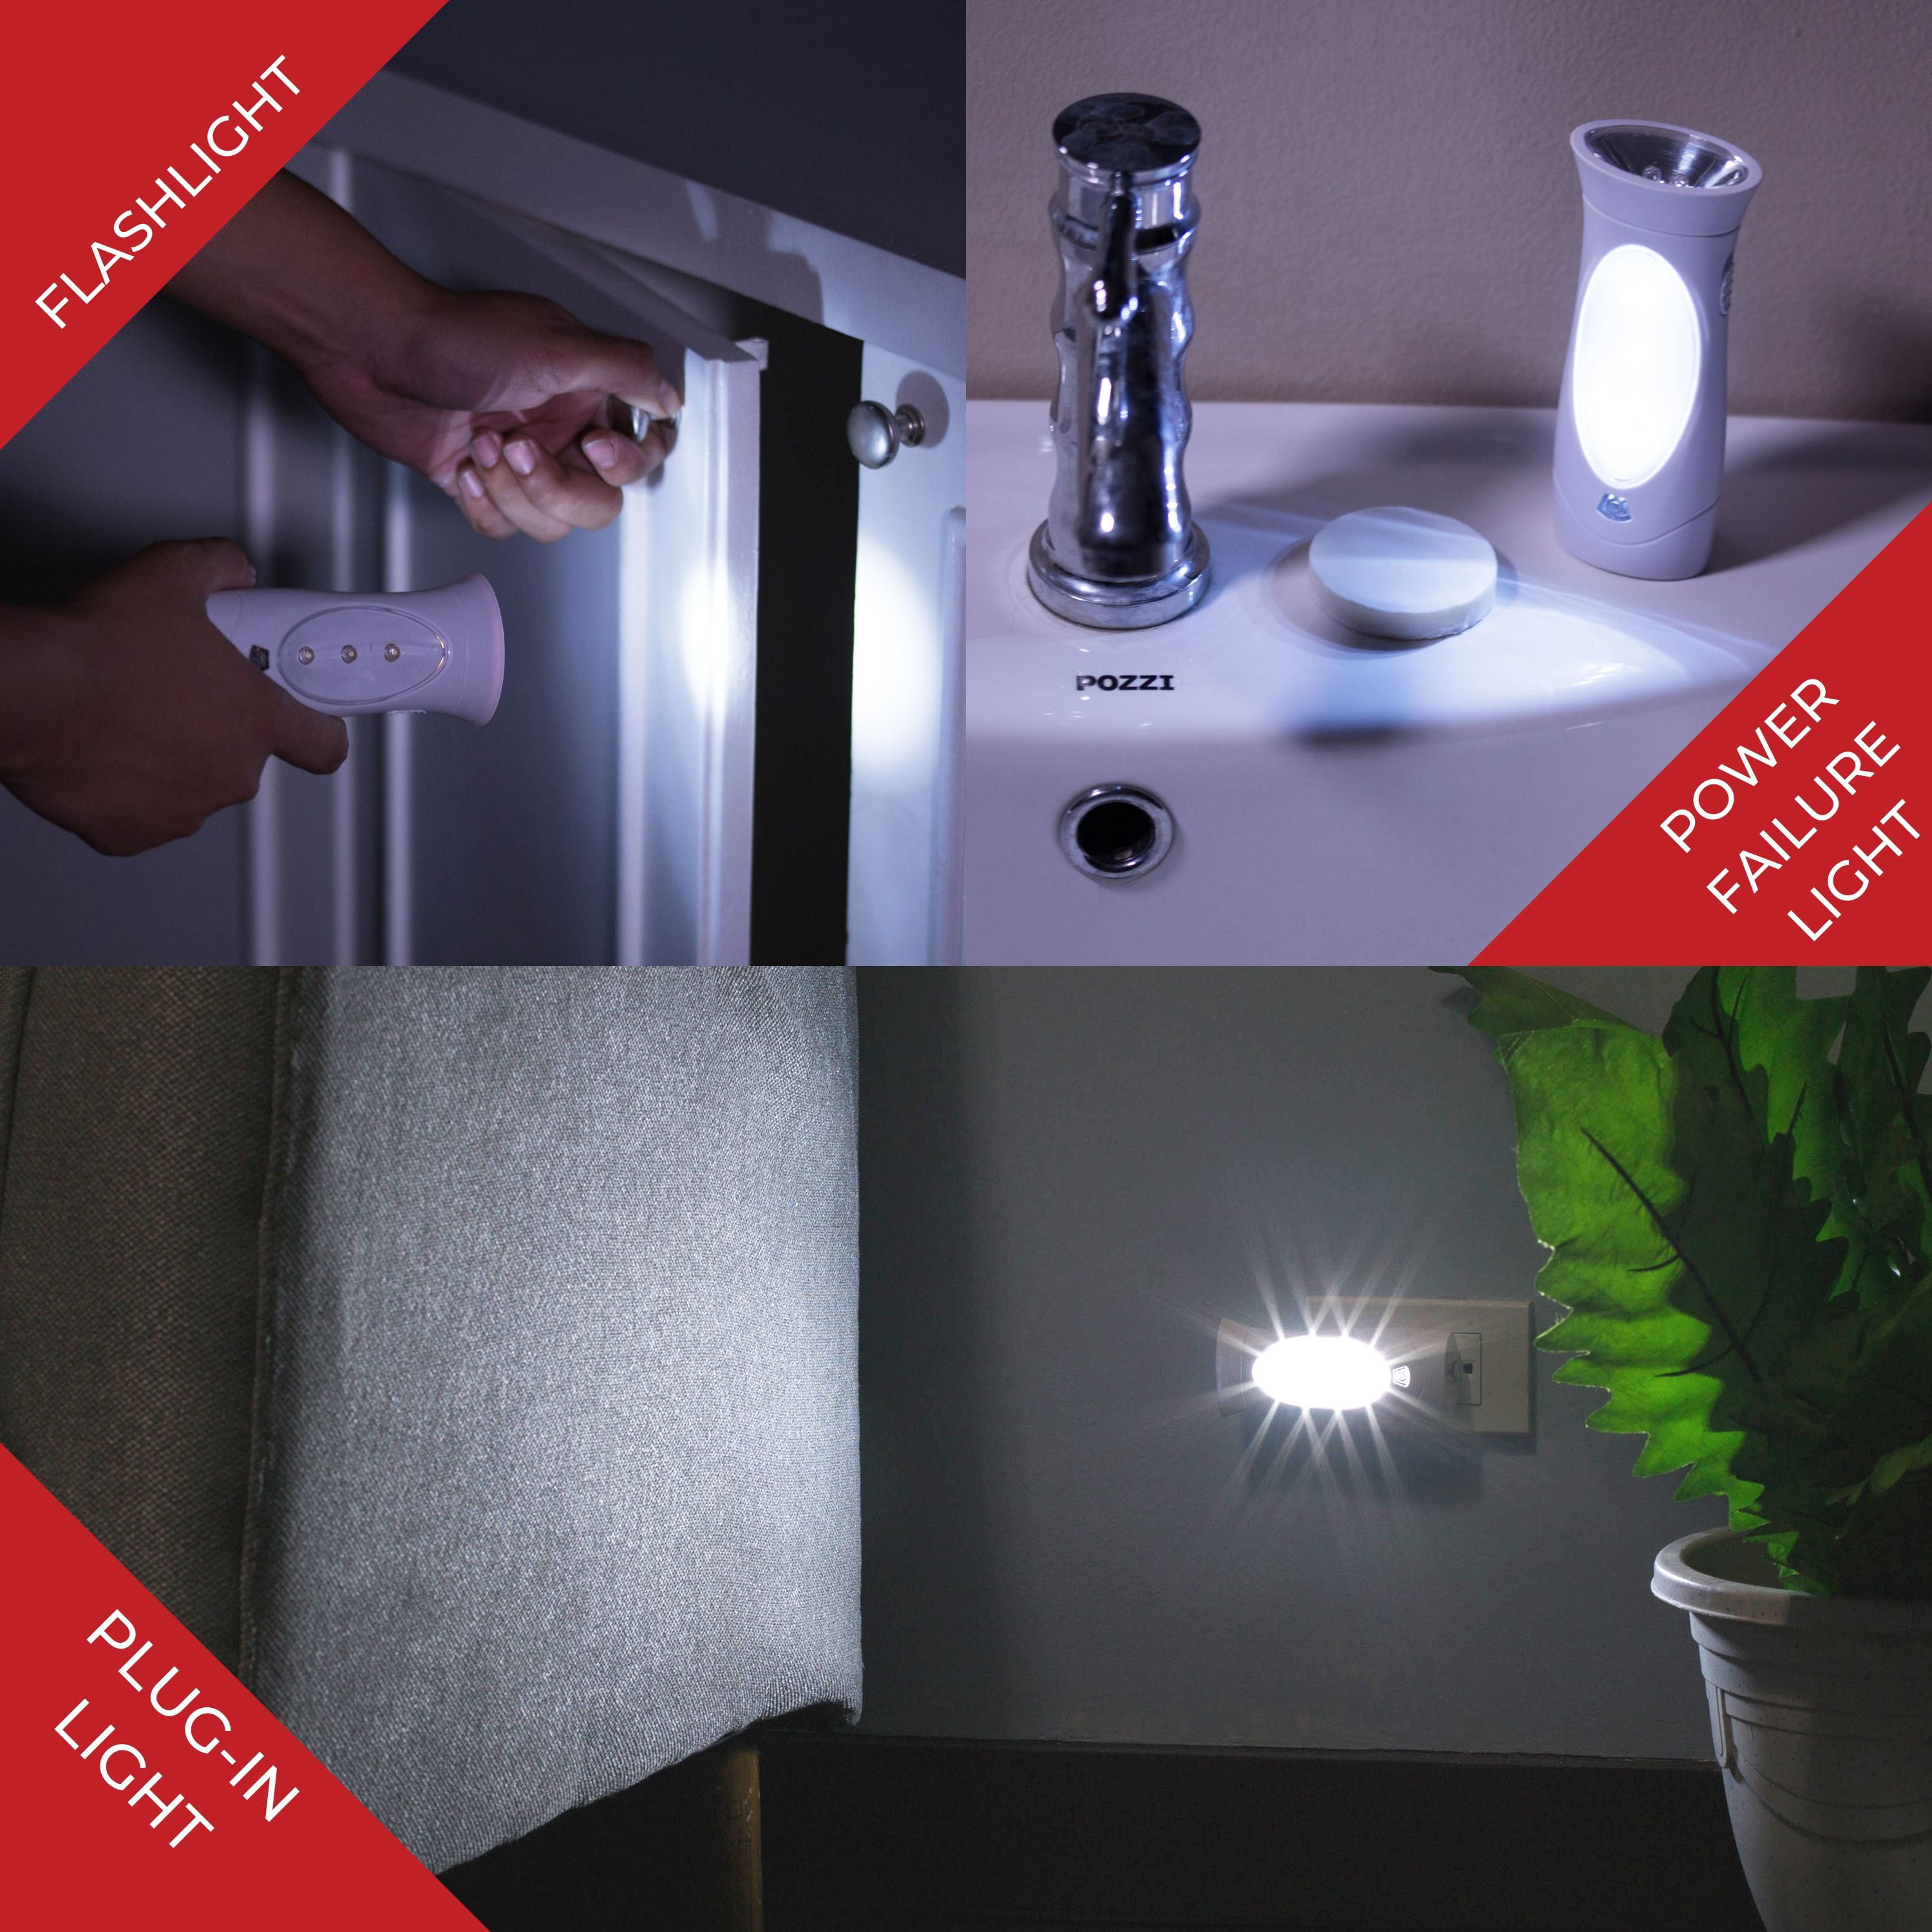 Amerelle Emergency Lights For Home, 2 Pack - AmerTac Power Failure Light  and Emergency Flashlight Automatically Lights When the Power Fails - 7 Hour